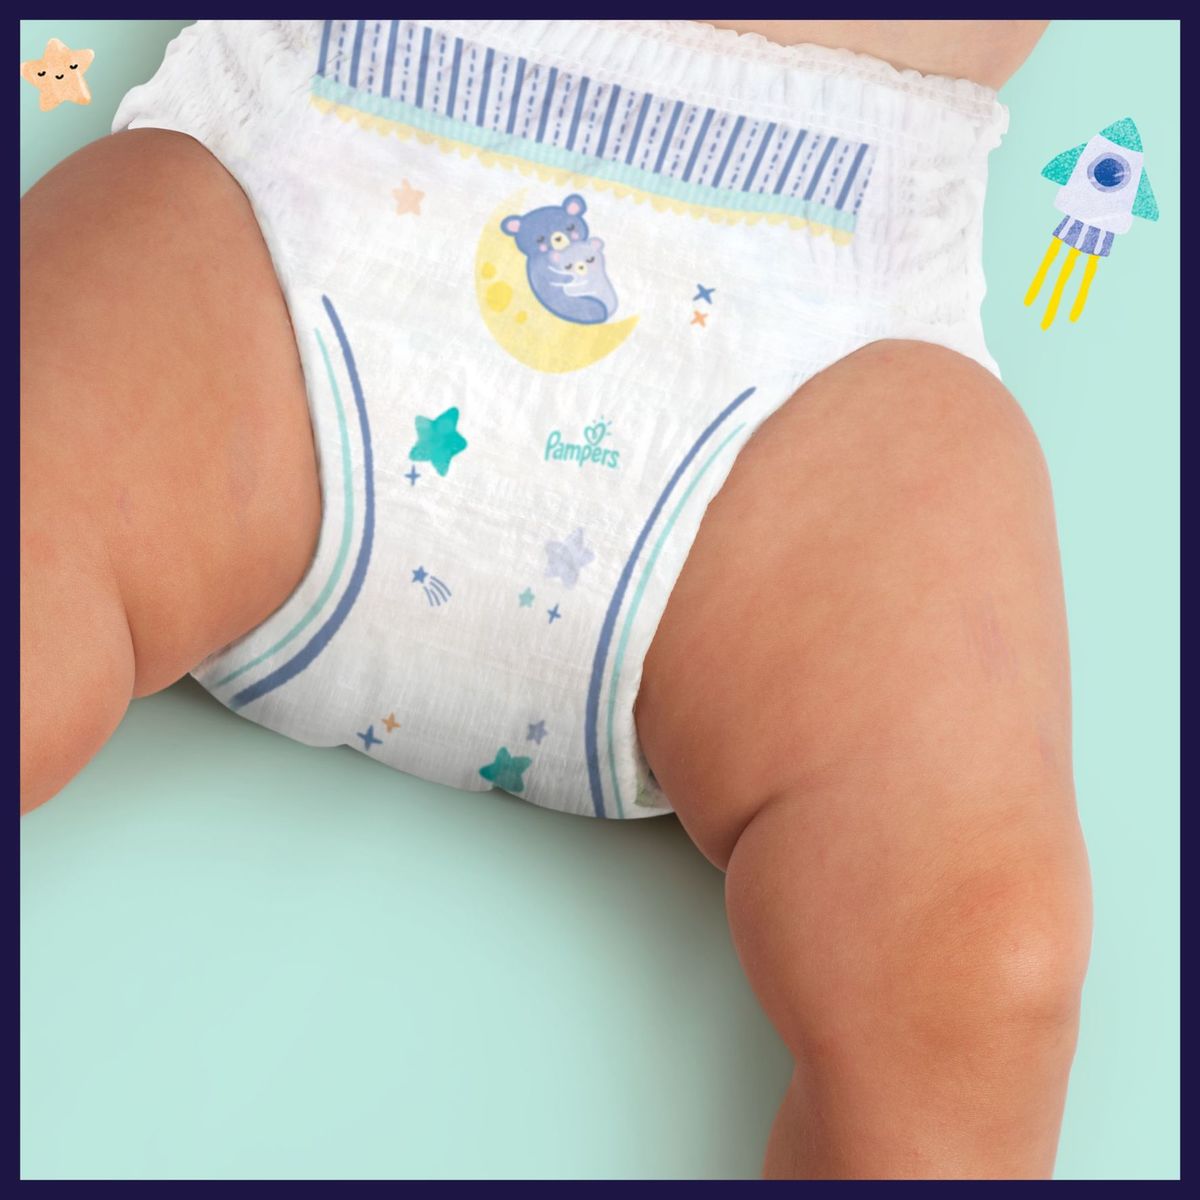 Pampers Night Pants Taille 6, 31 Couches-Culottes, 15kg+